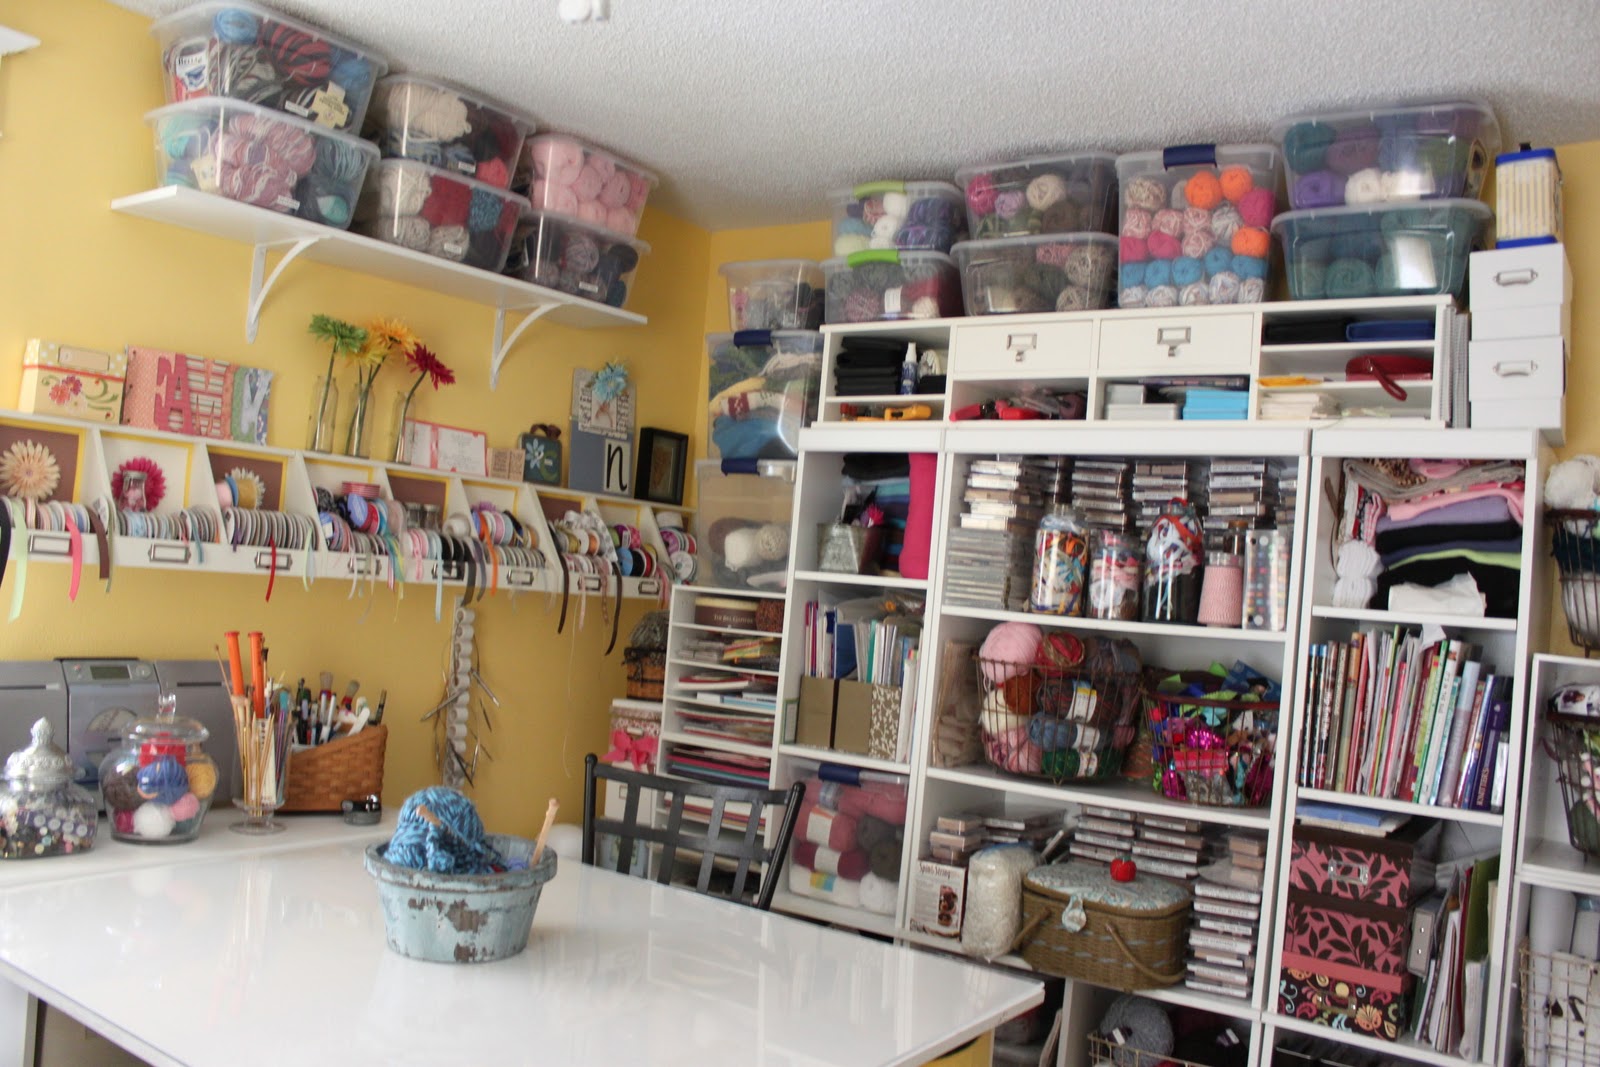 Wrapped In Love: Before and After shots of the Craft Room